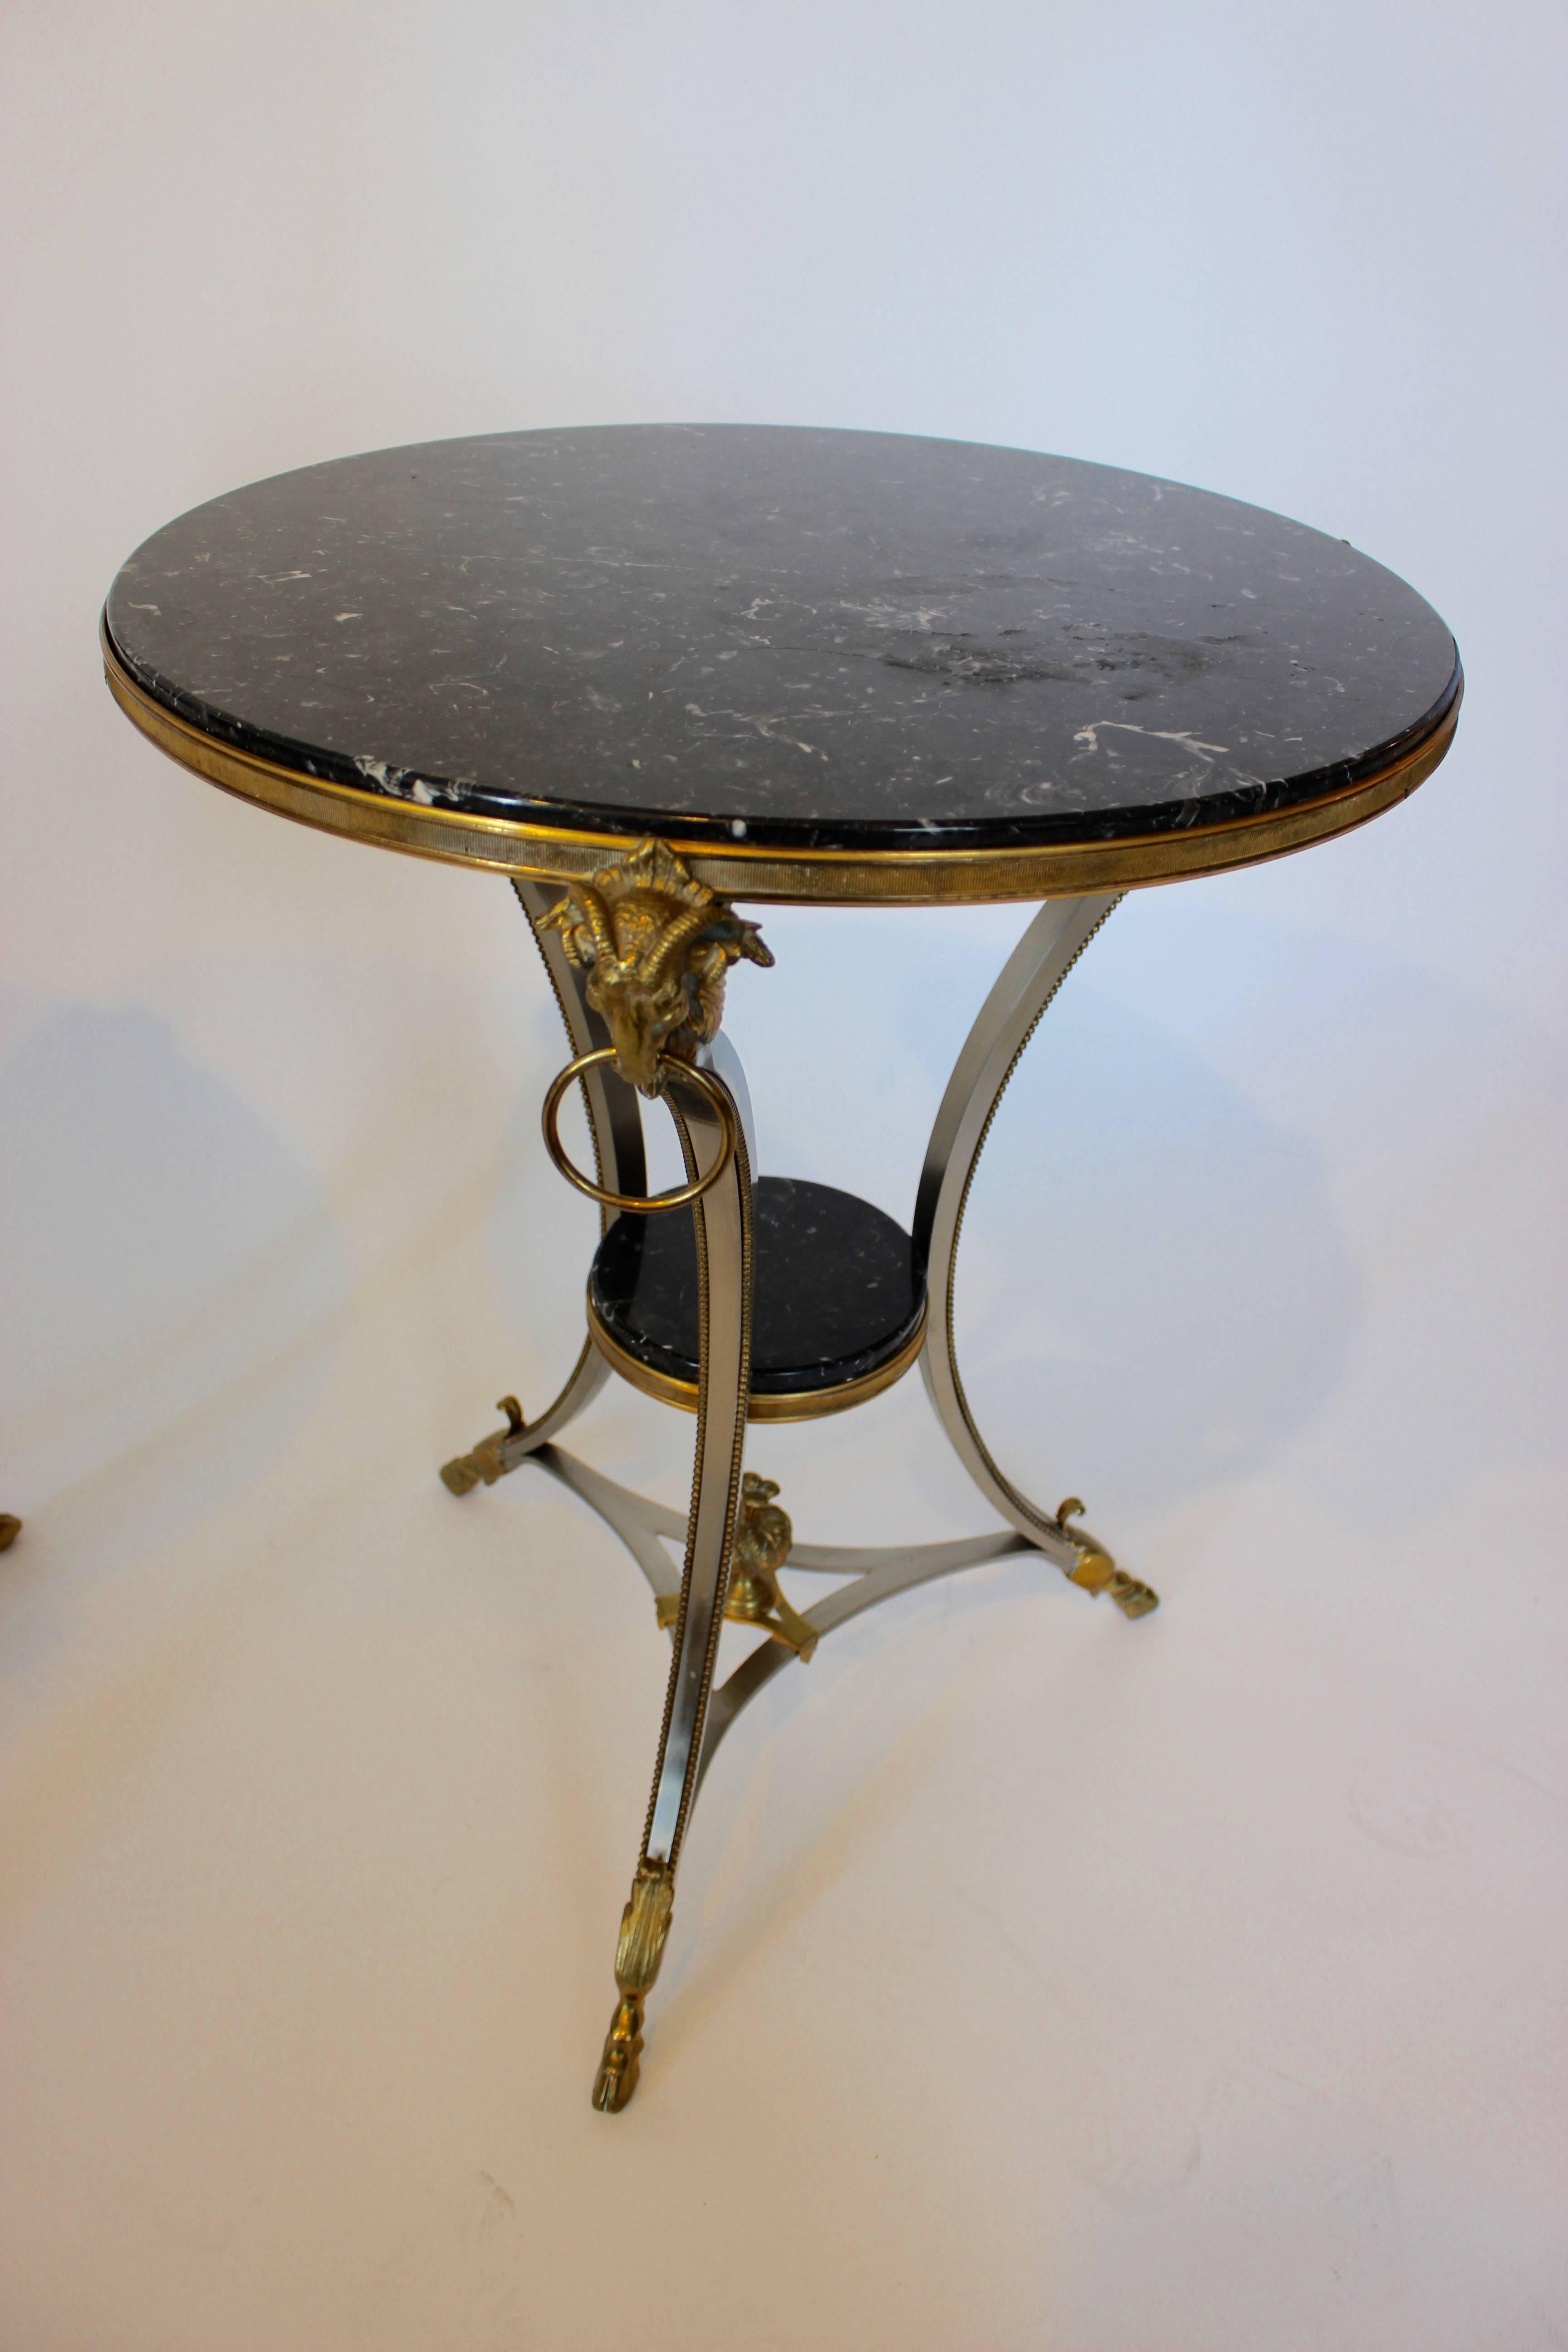 American Pair of Ormolu and Metal Guéridon Tables with Black Marble Top and Ram’s Masks For Sale